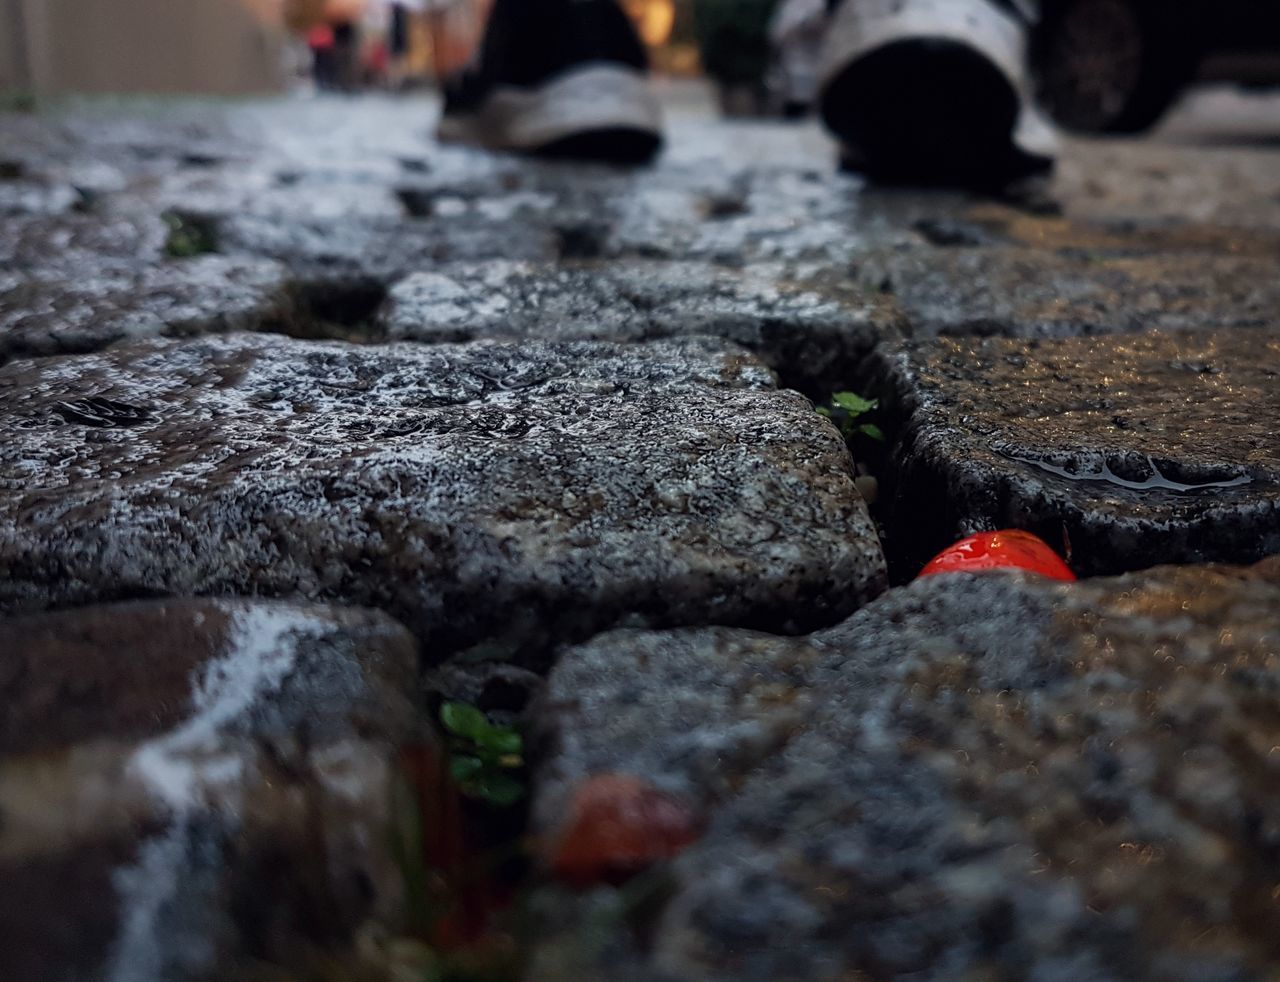 selective focus, solid, rock, day, close-up, rock - object, outdoors, textured, nature, red, no people, rough, stone - object, low section, footpath, still life, architecture, surface level